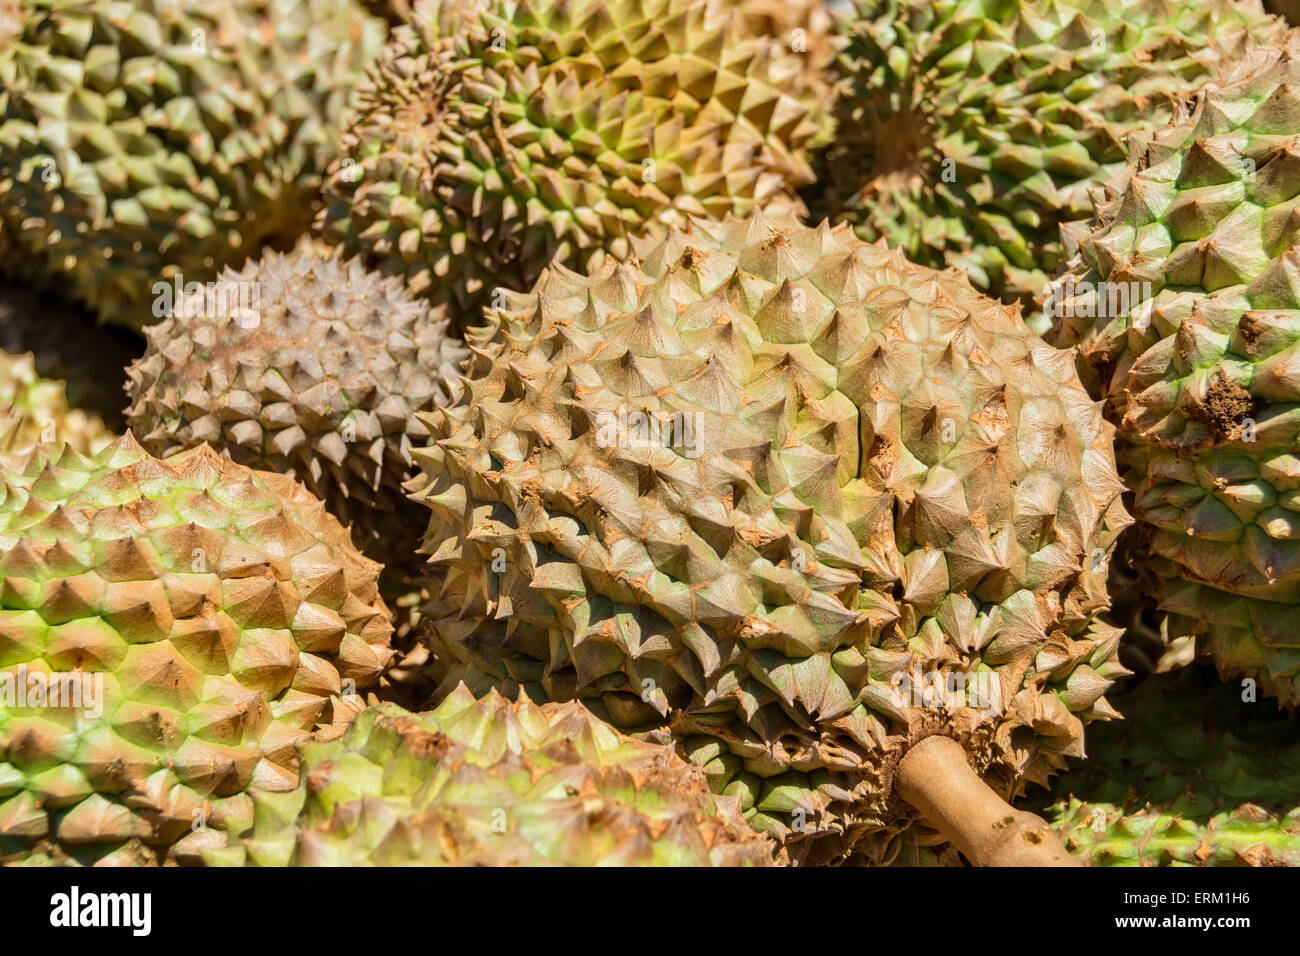 Spiky and smelly Philippines Durian for sale in a local market Stock Photo